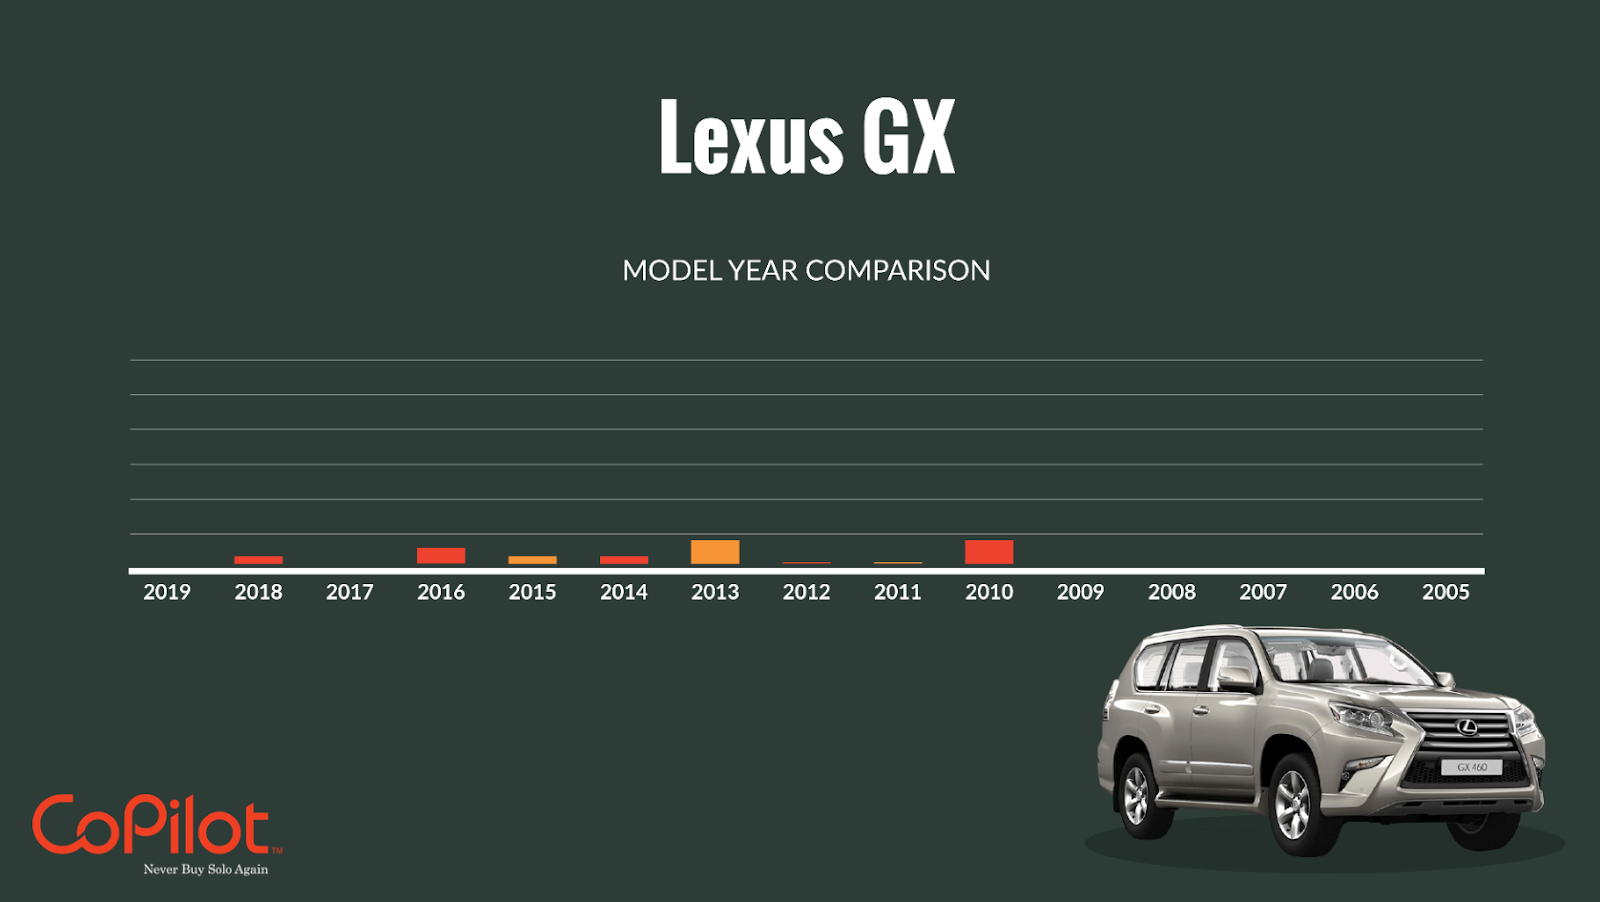 Bar chart showing count of problems reported by Lexus GX owners, model years 2005-2019